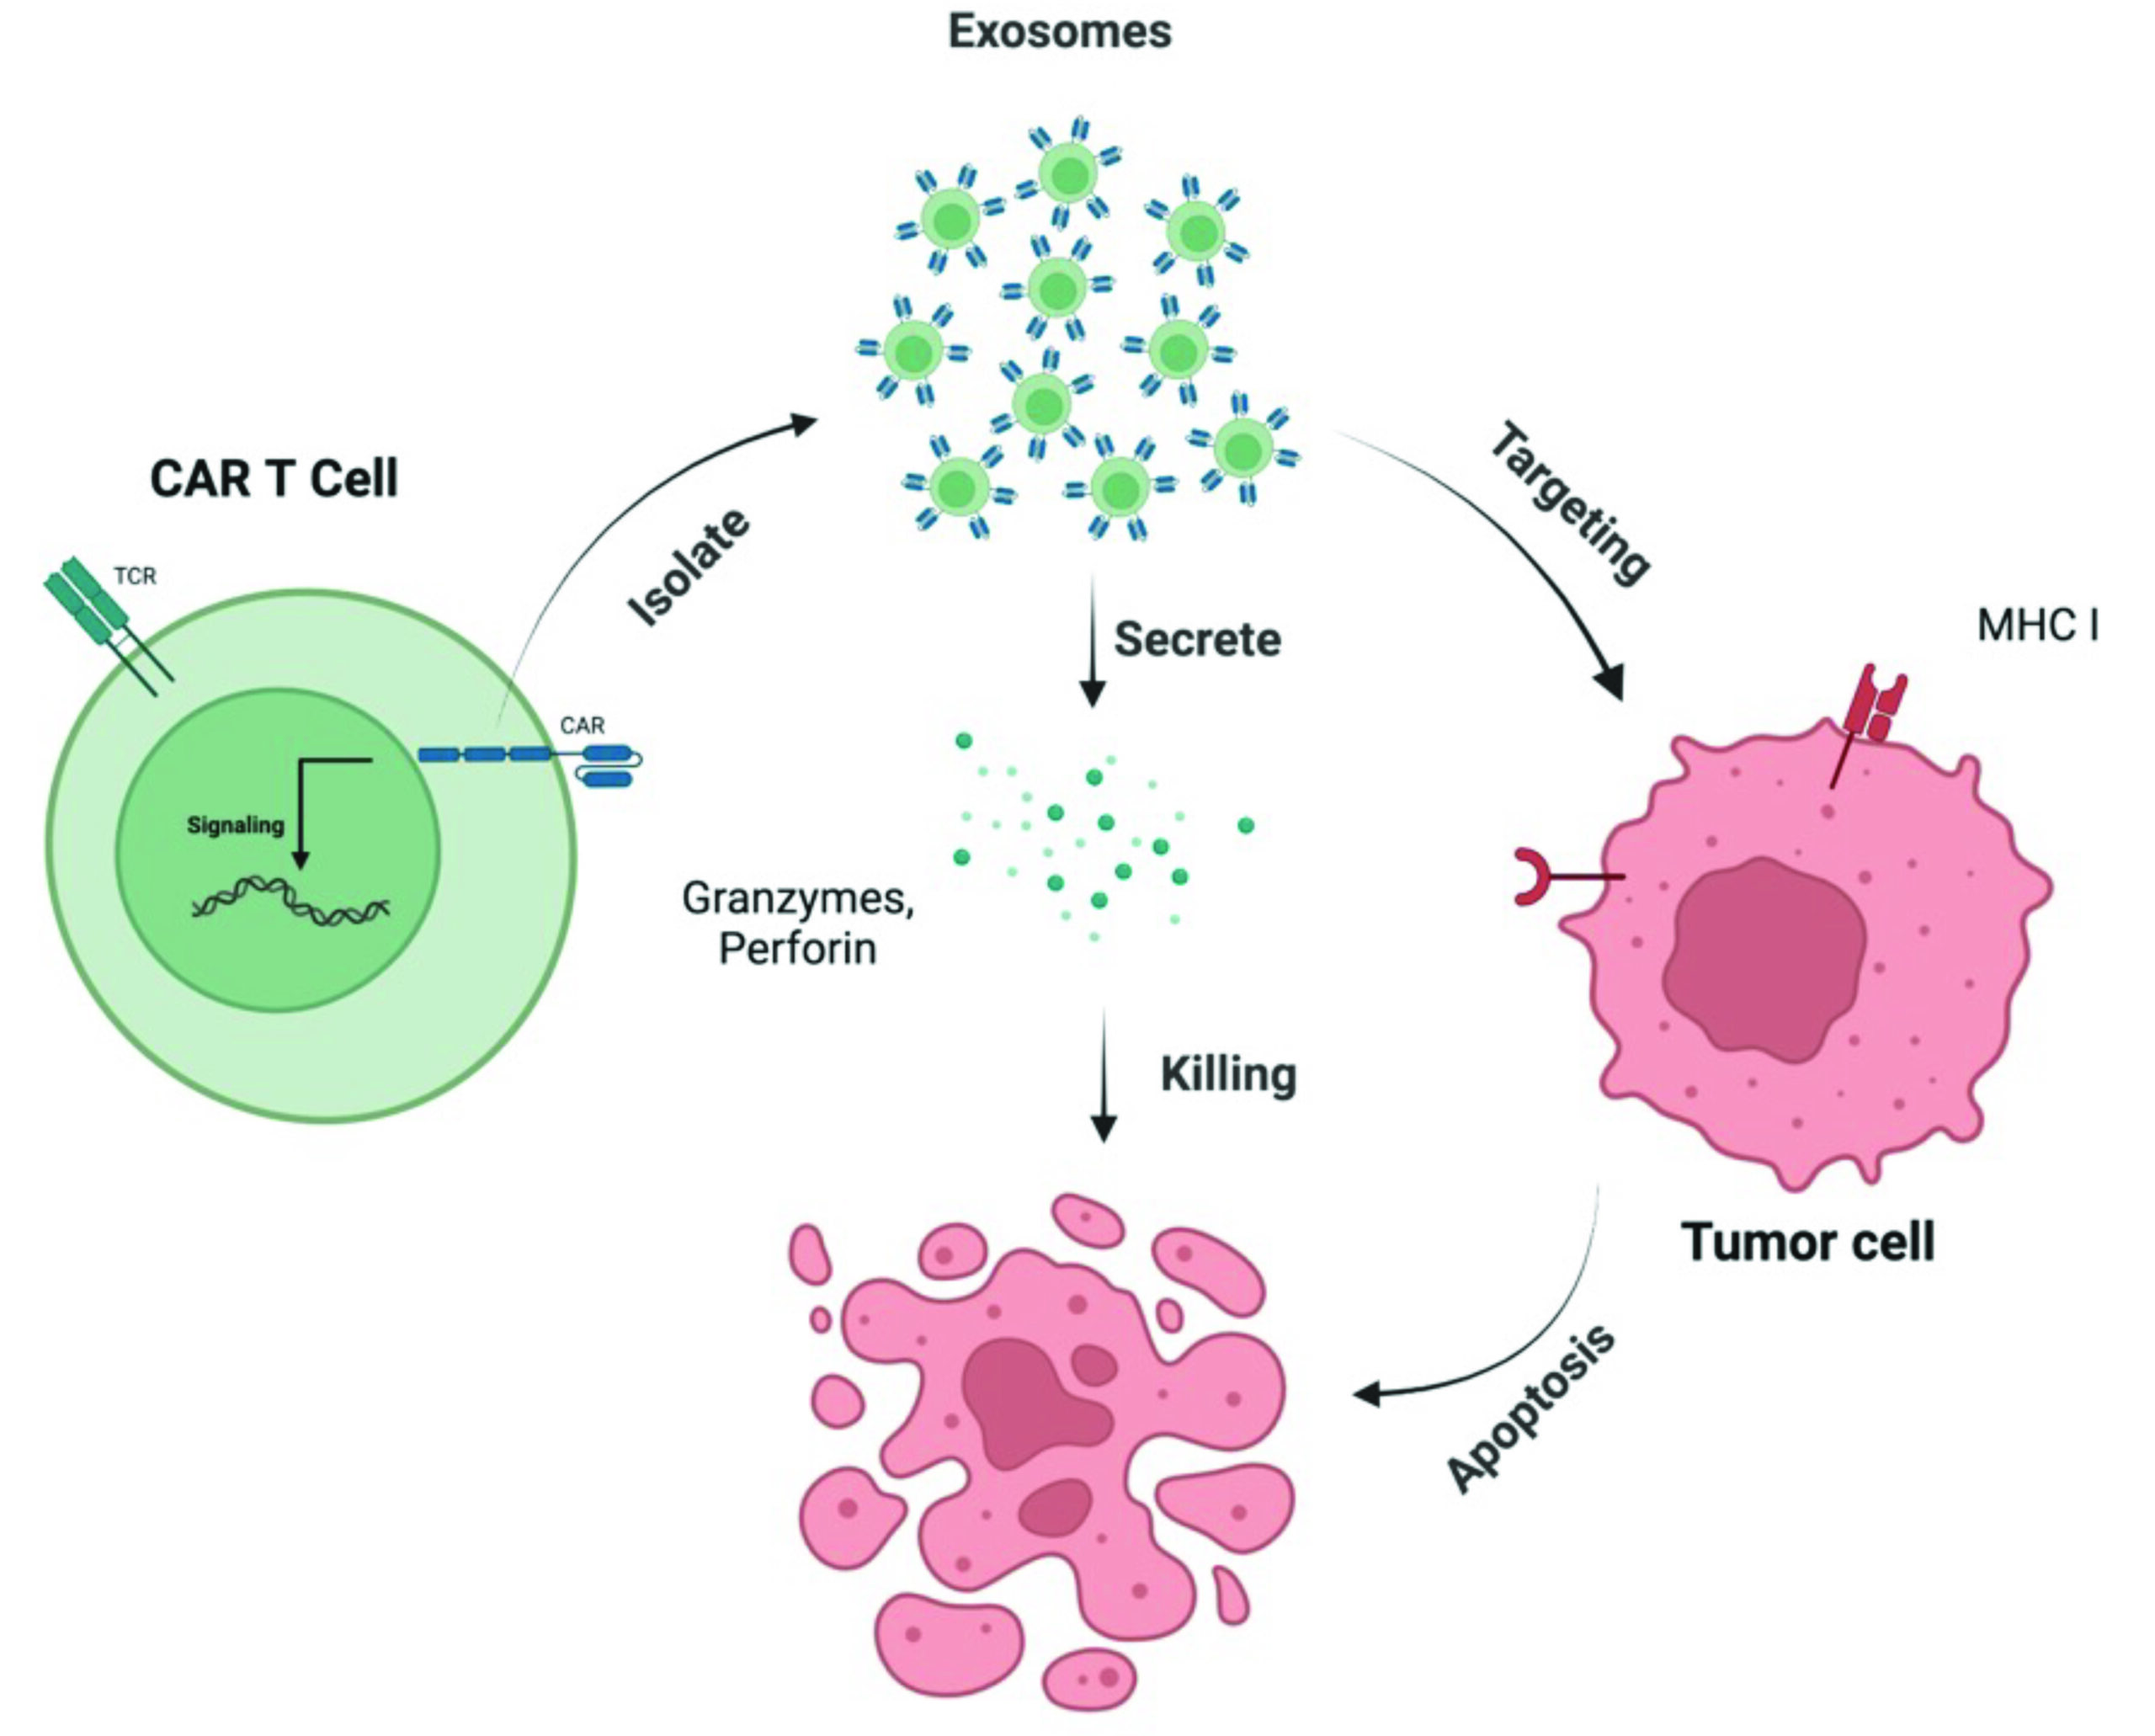 Targeted cancer therapy with CAR T cell